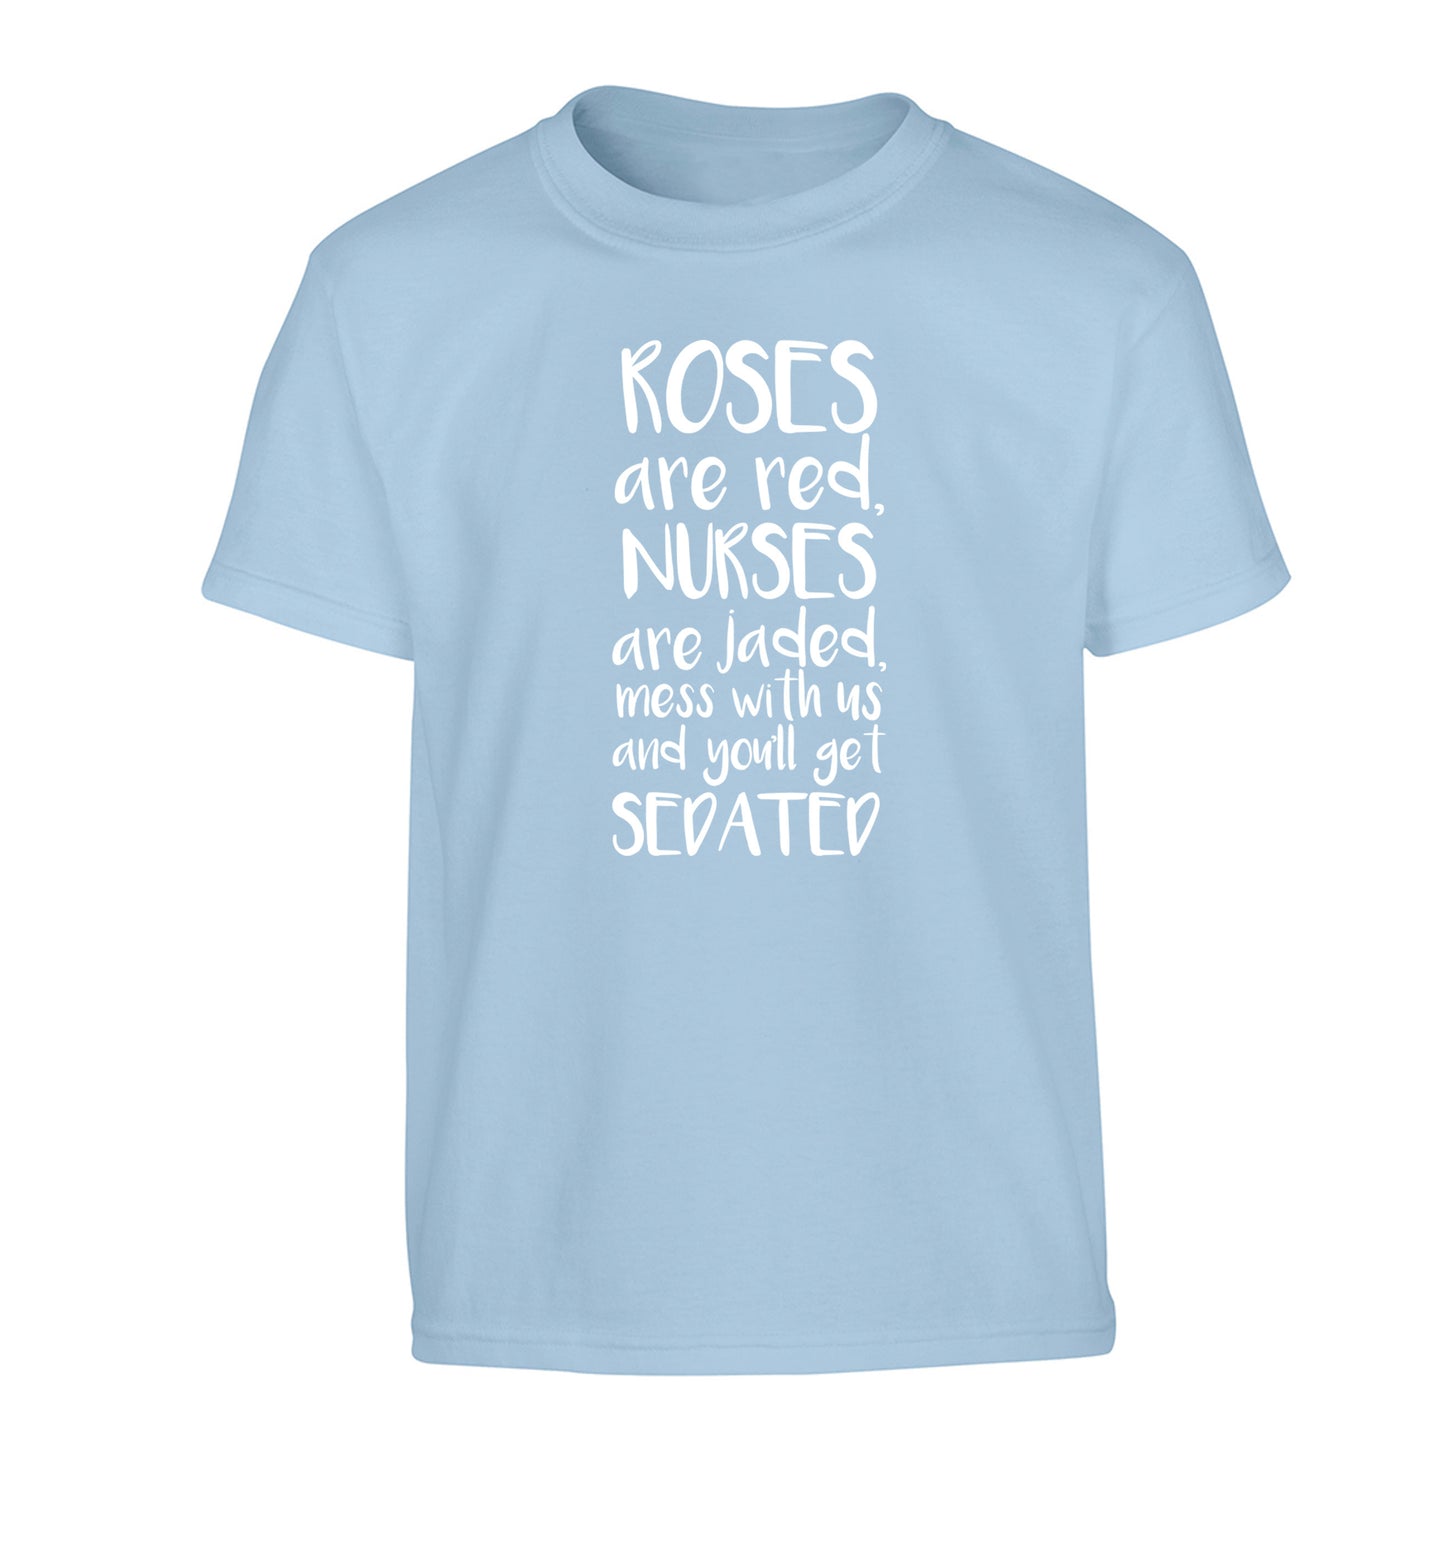 Roses are red, nurses are jaded, mess with us and you'll get sedated Children's light blue Tshirt 12-14 Years